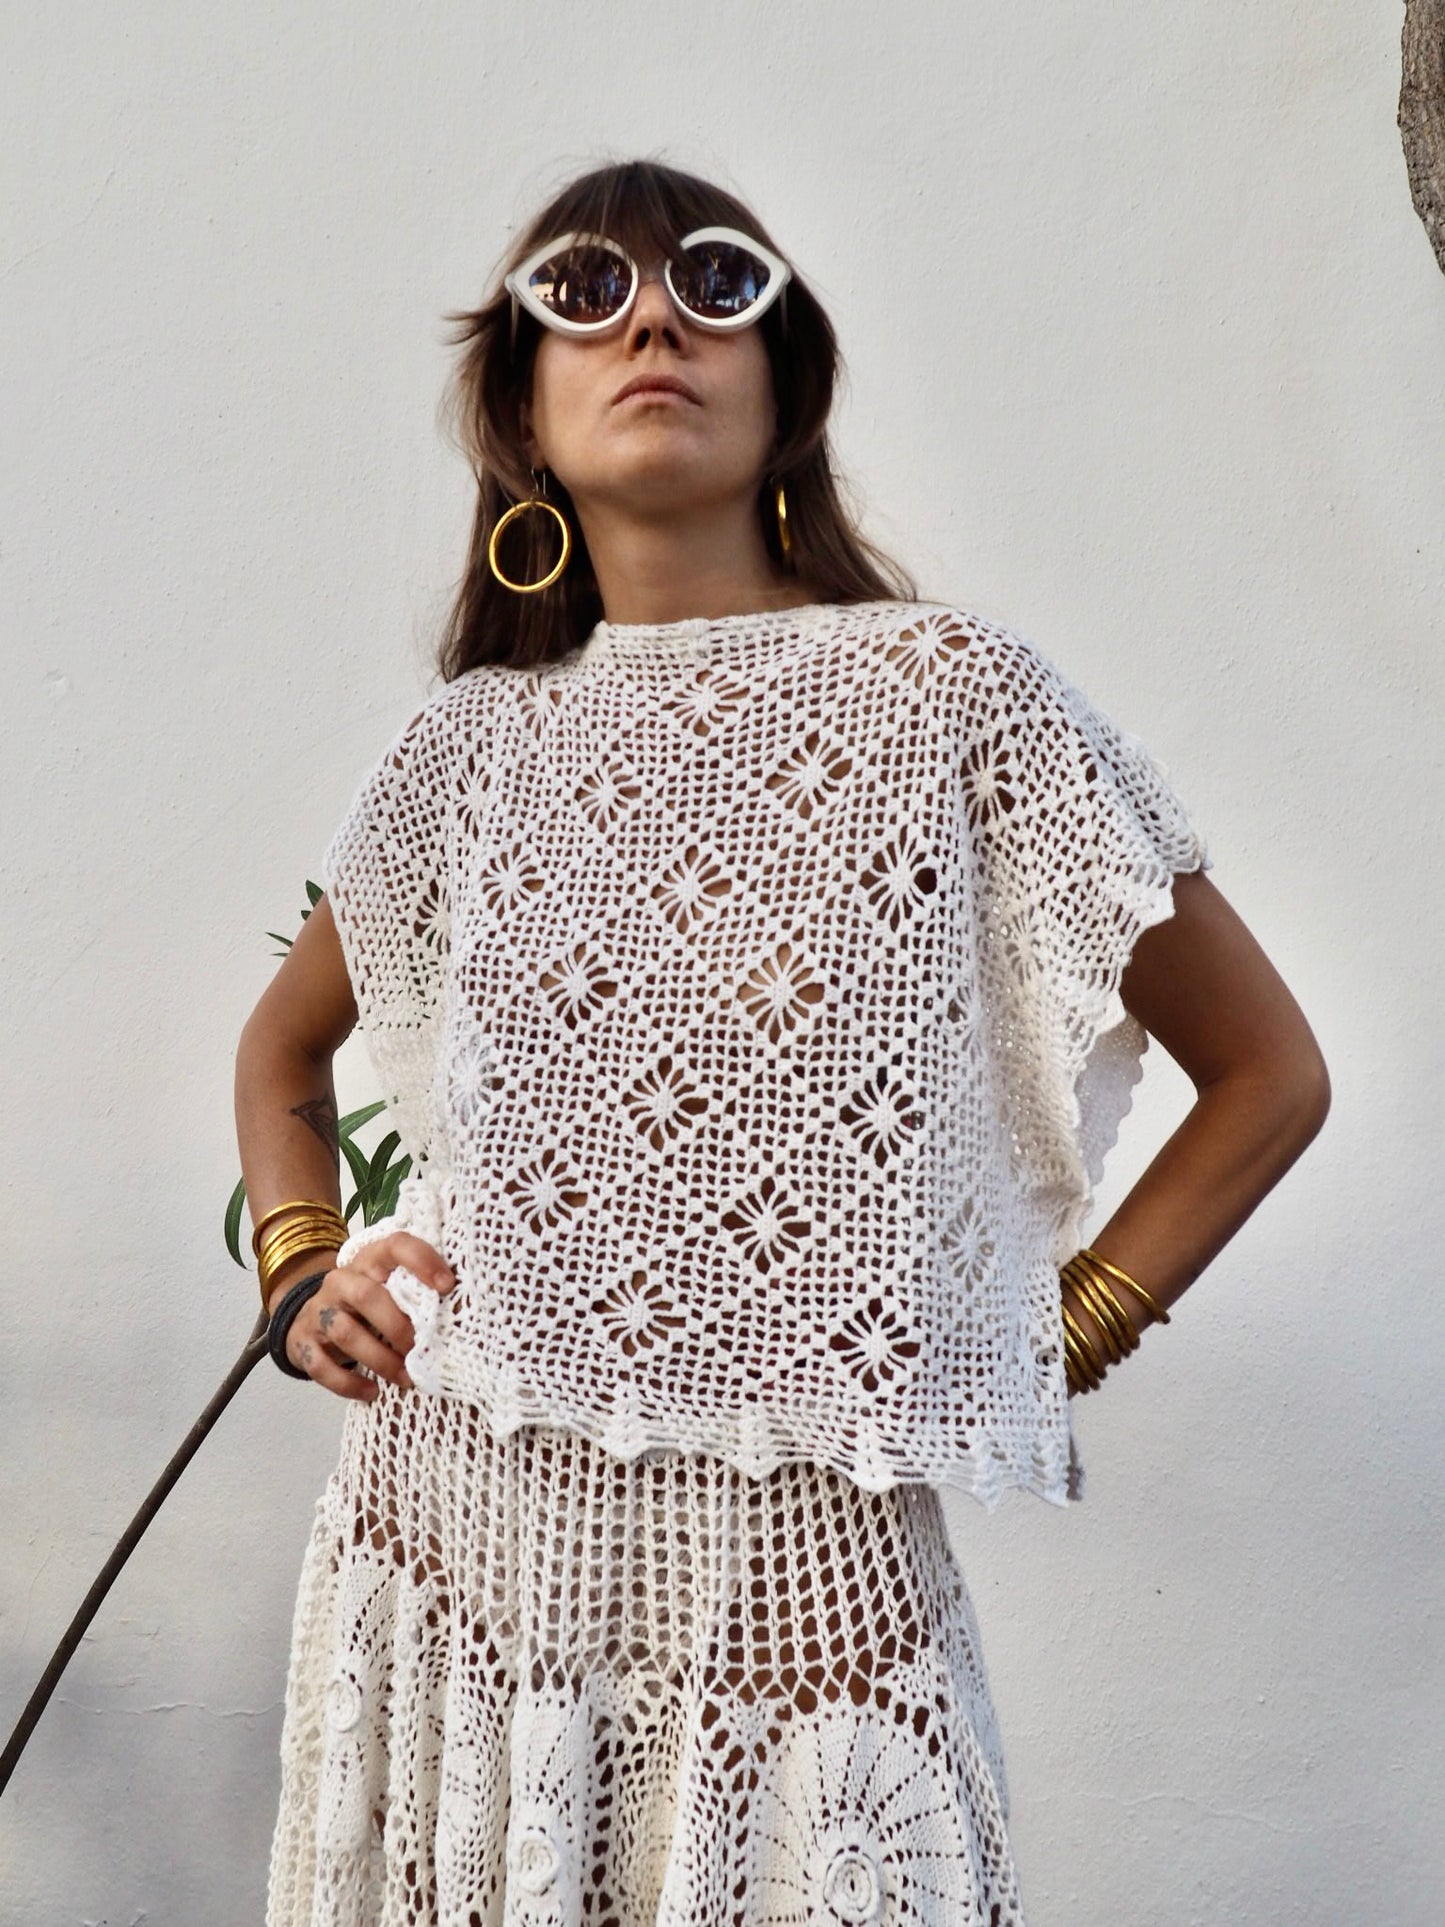 Amazing one off a kind white vintage crochet lace top up-cycled by Vagabond Ibiza